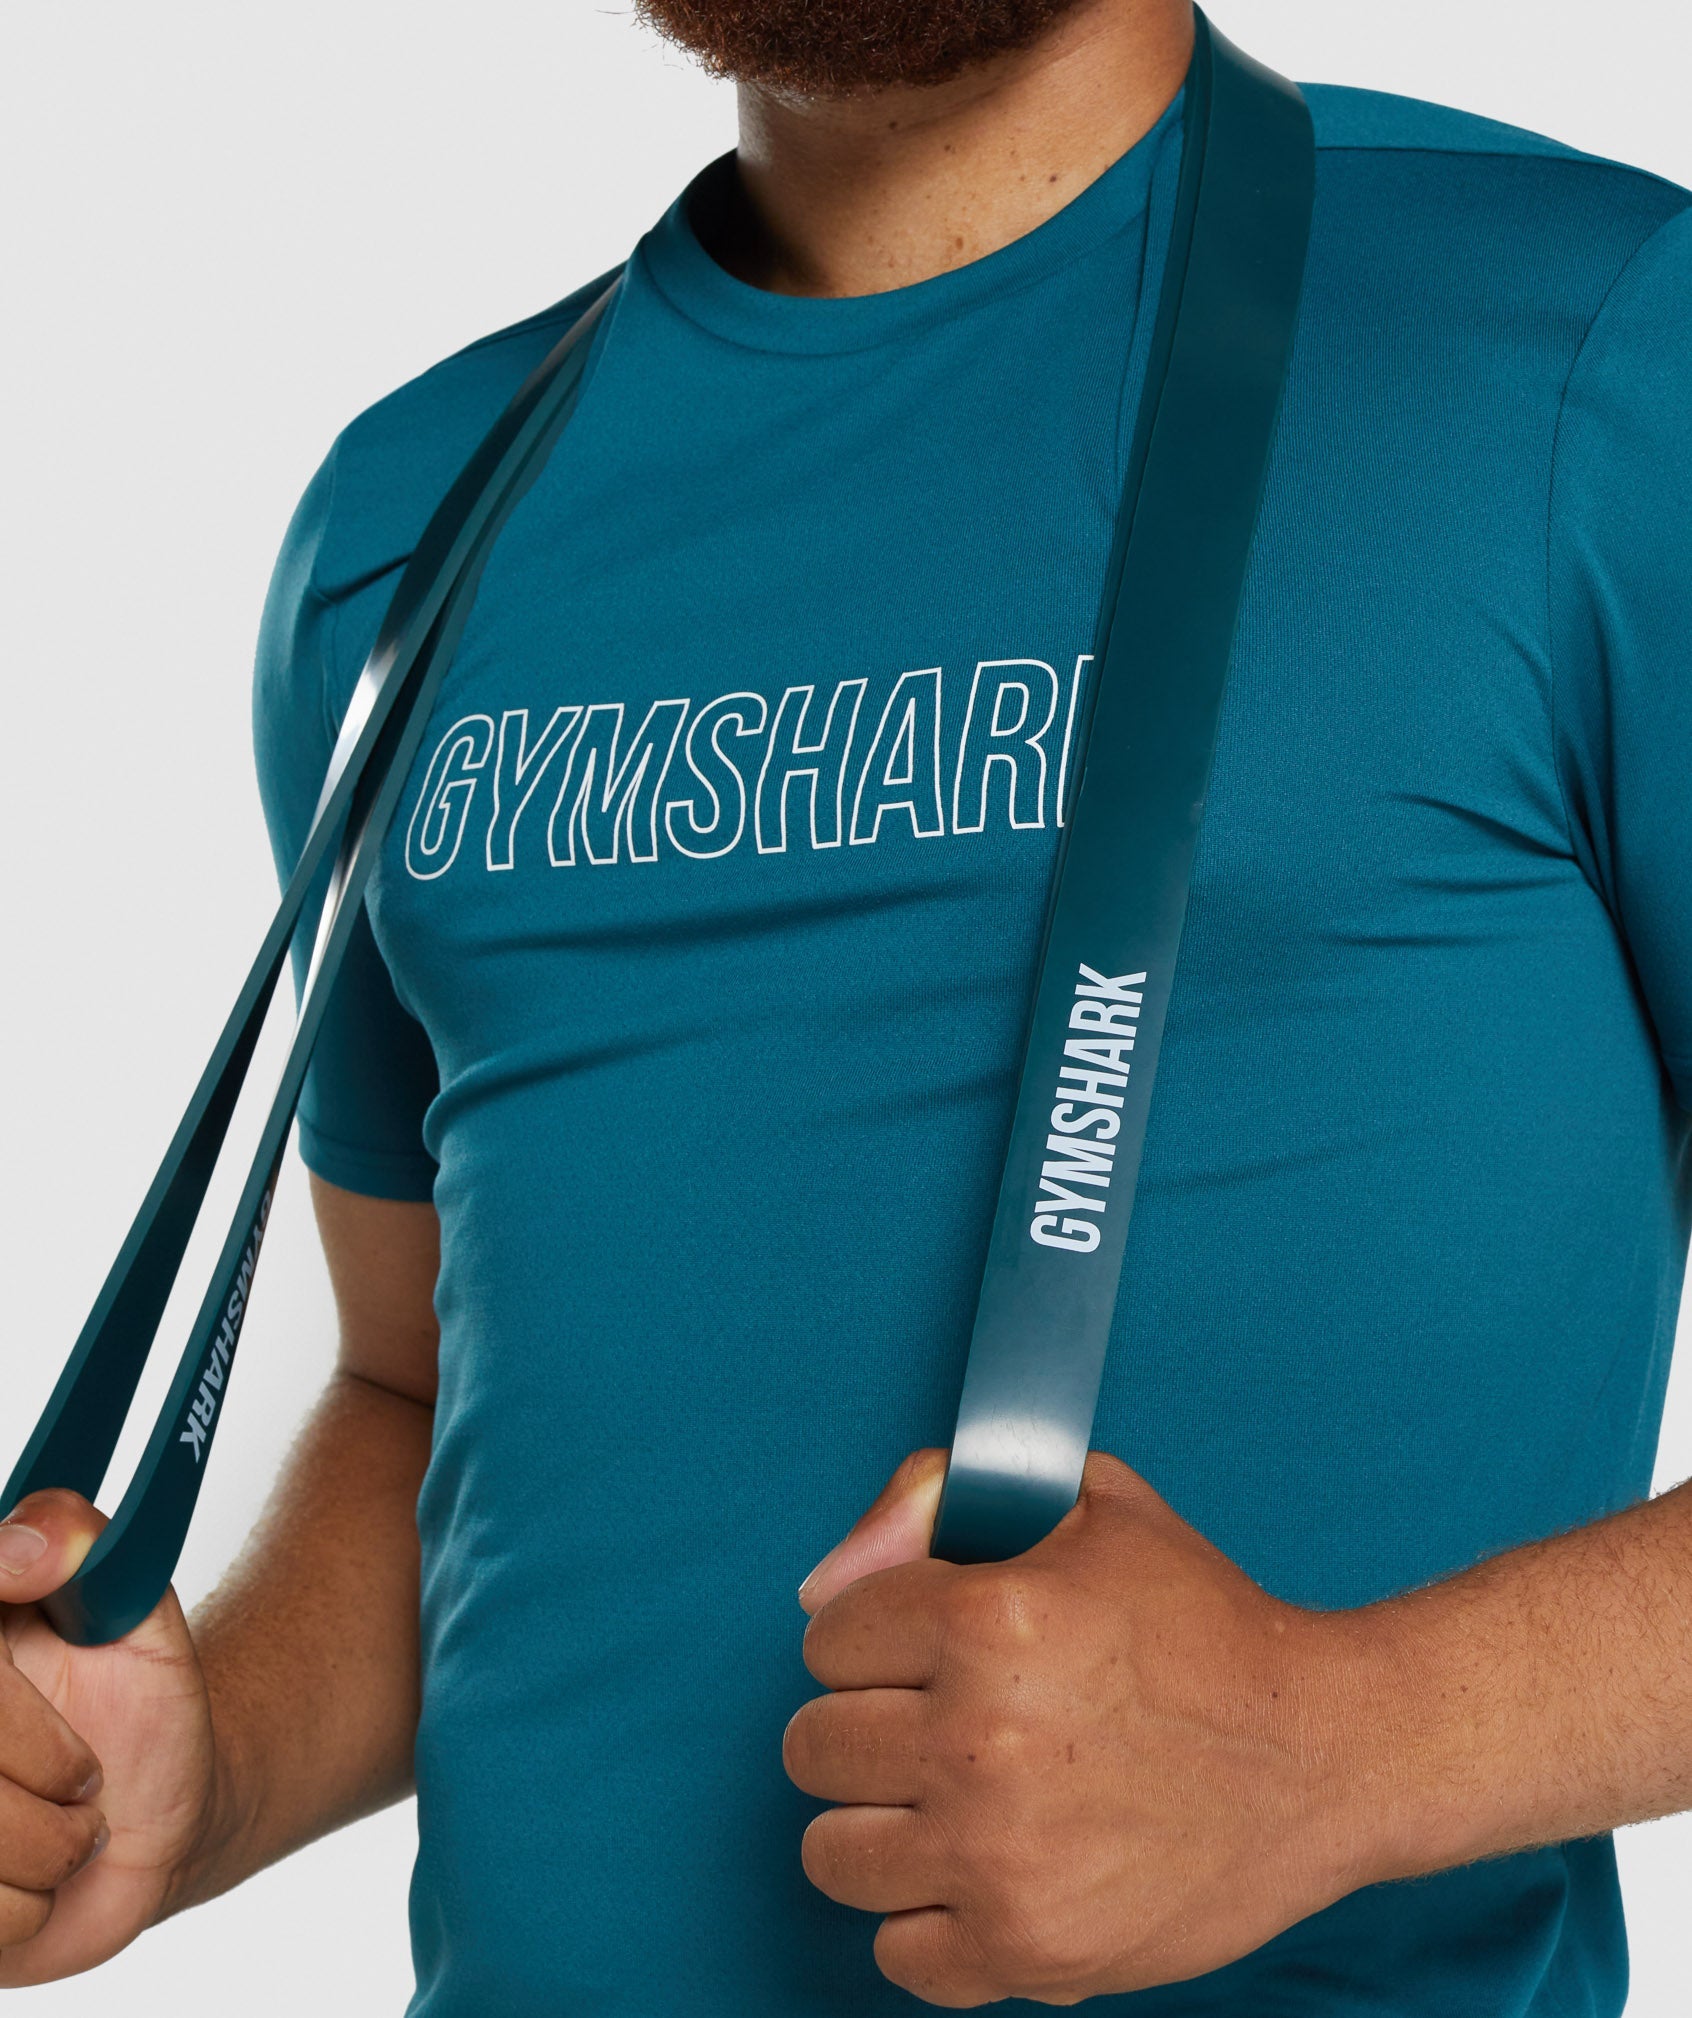 11kg to 36kg Resistance Band in Teal - view 5